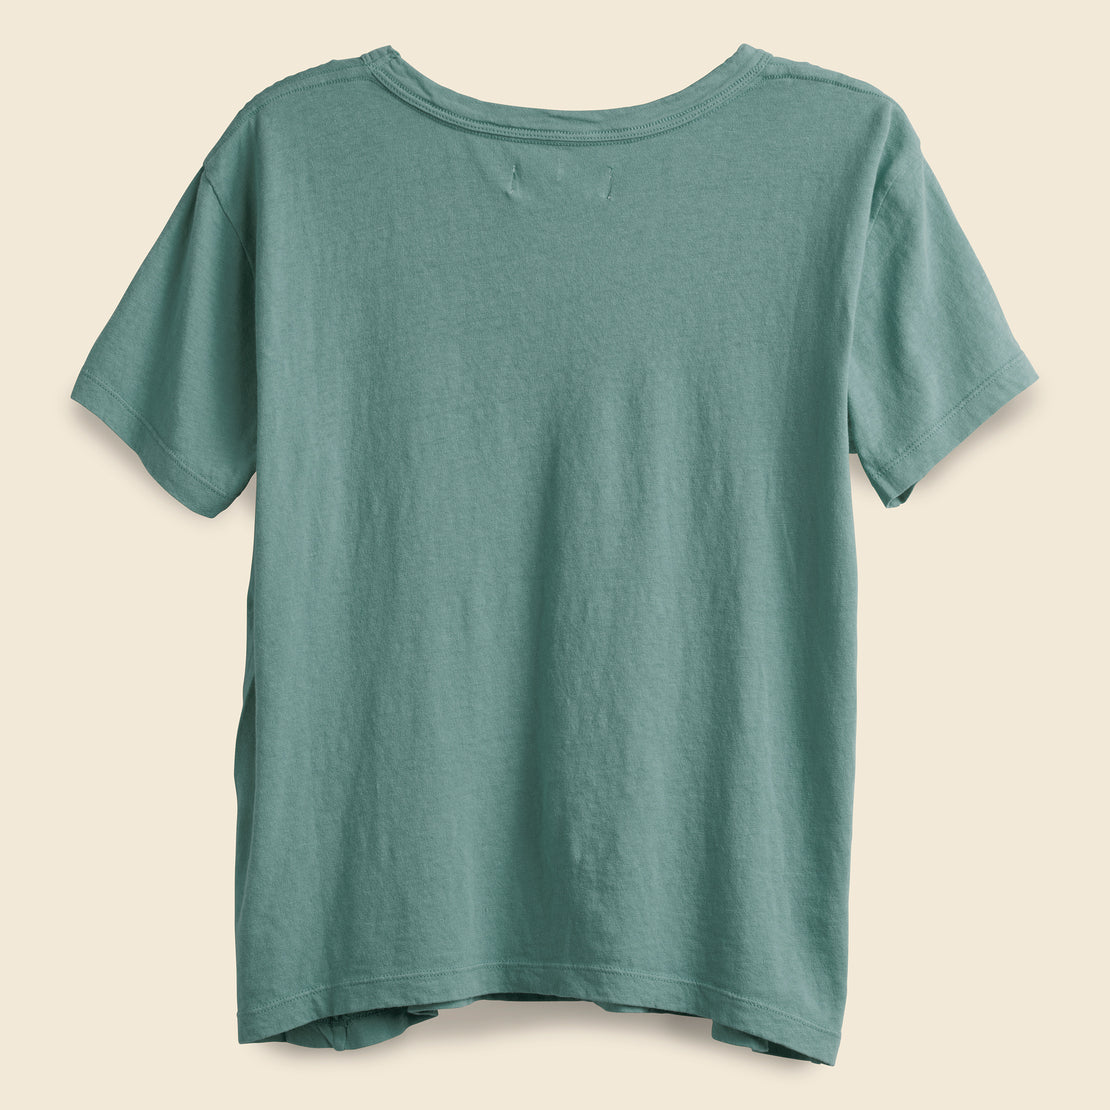 Drop Tee - Dusty Blue - Imogene + Willie - STAG Provisions - W - Tops - S/S Tee